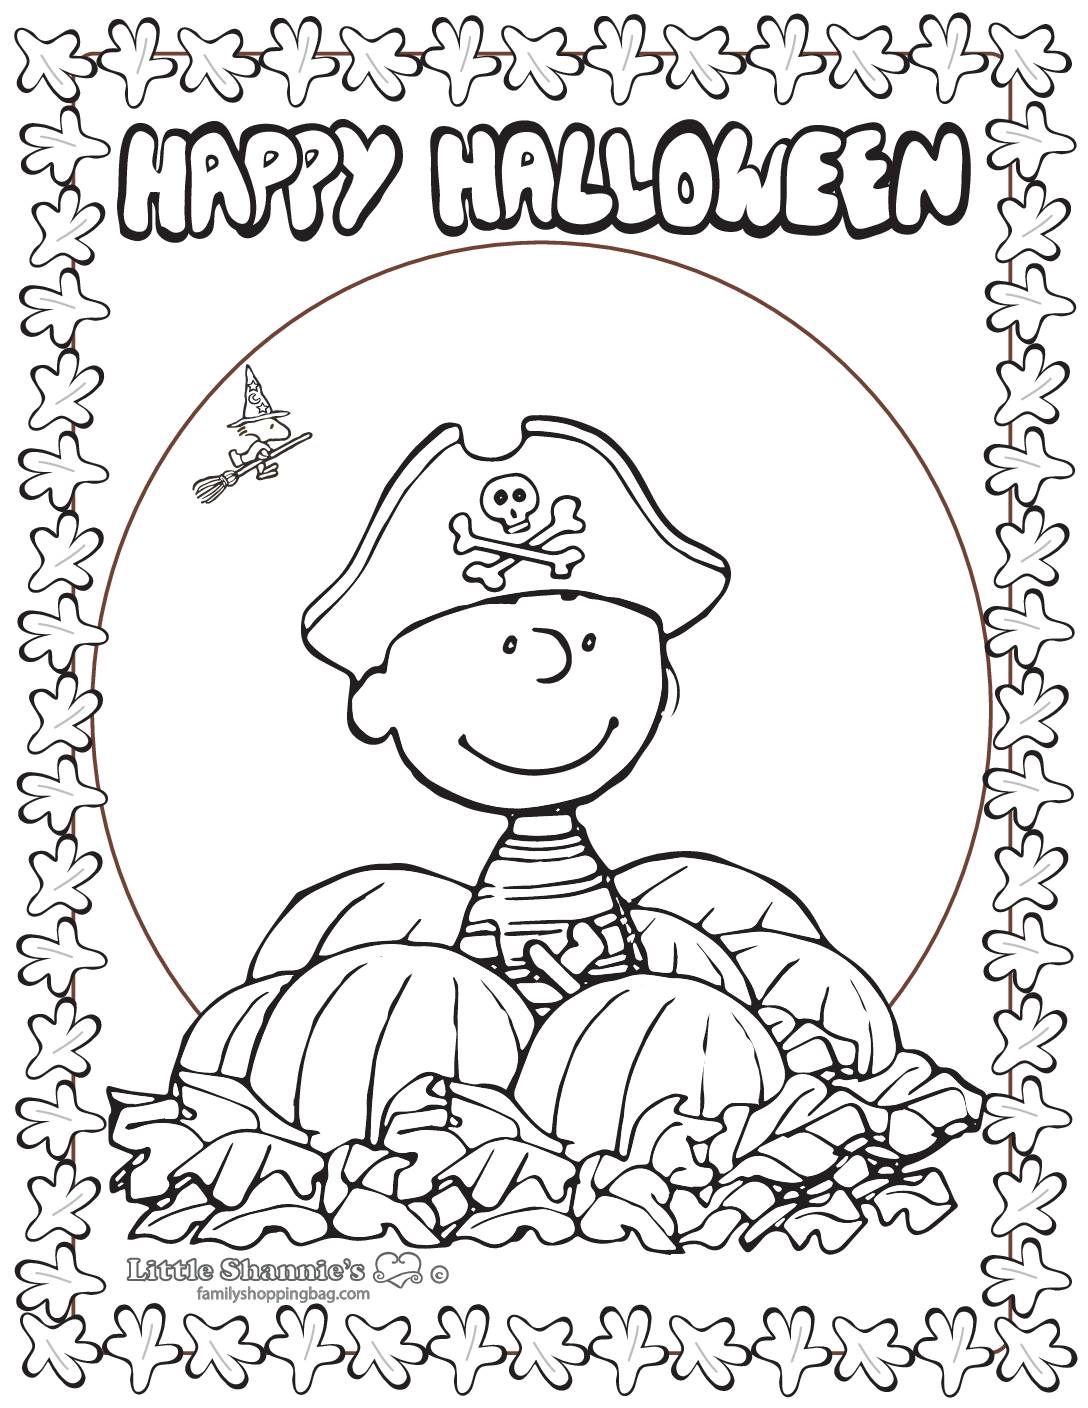 Coloring Page 2 Peanuts Halloween Coloring Pages